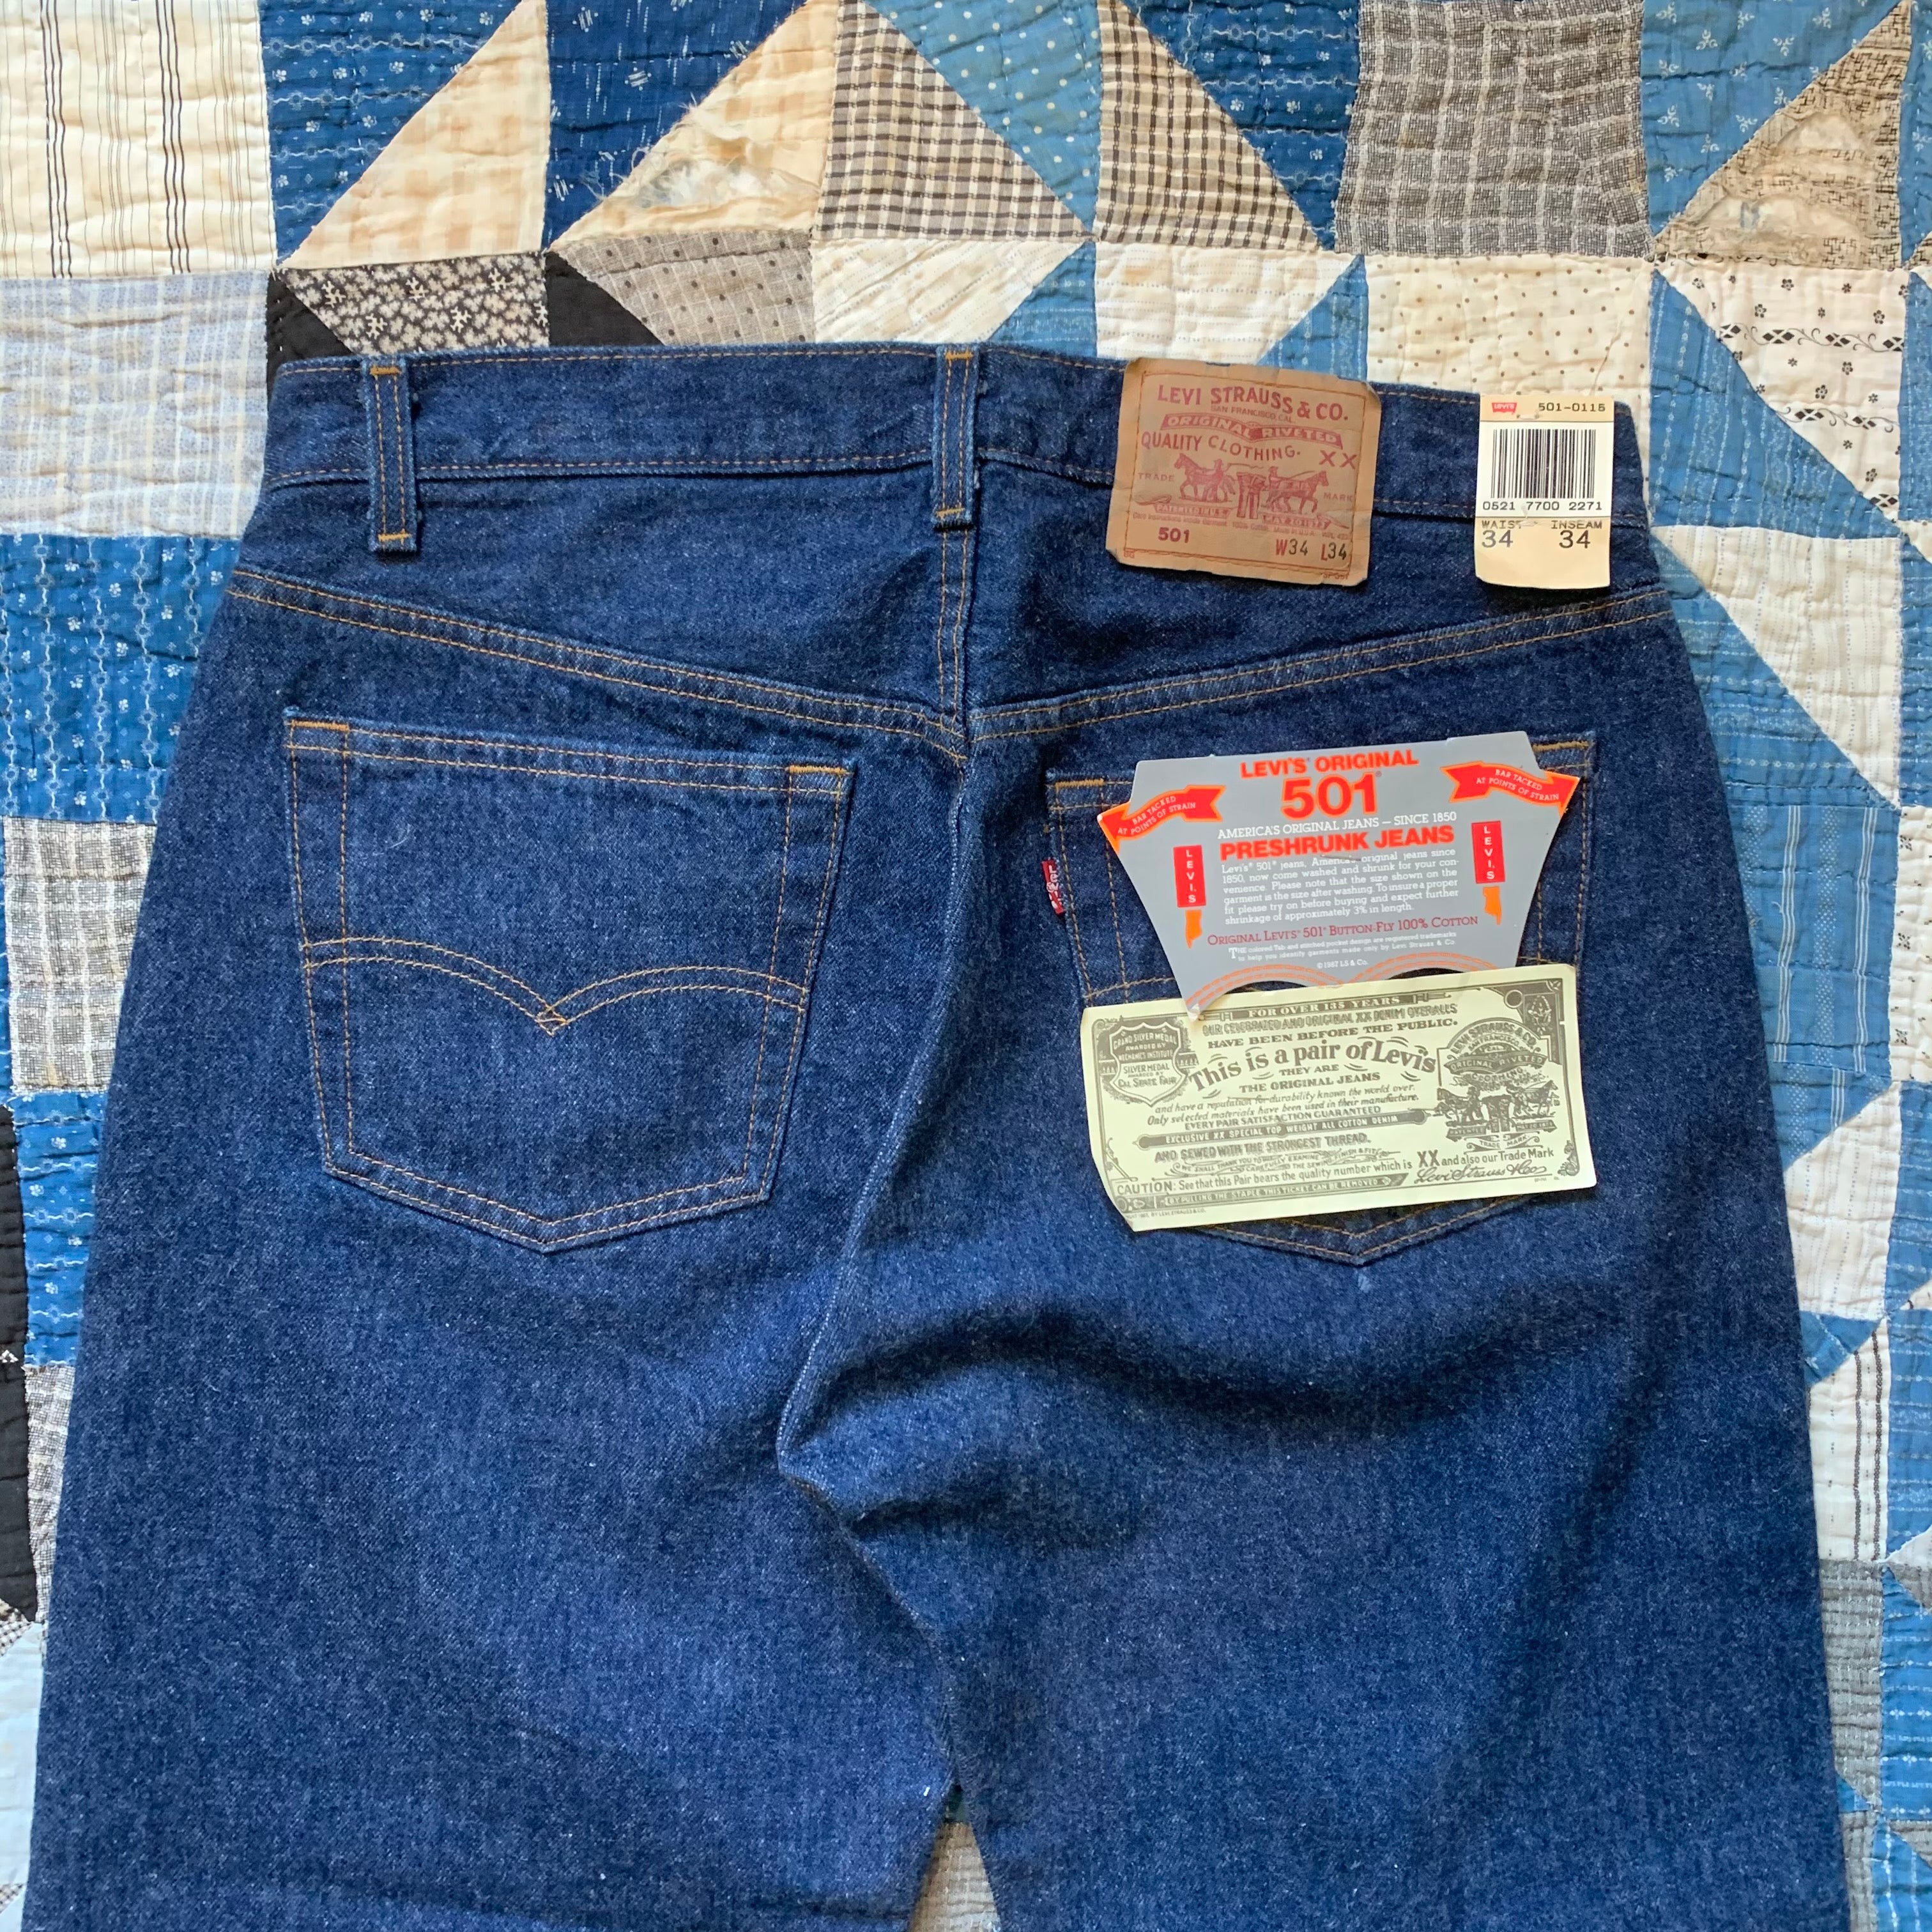 Differences In Fades: The Influence of Weight of Denim